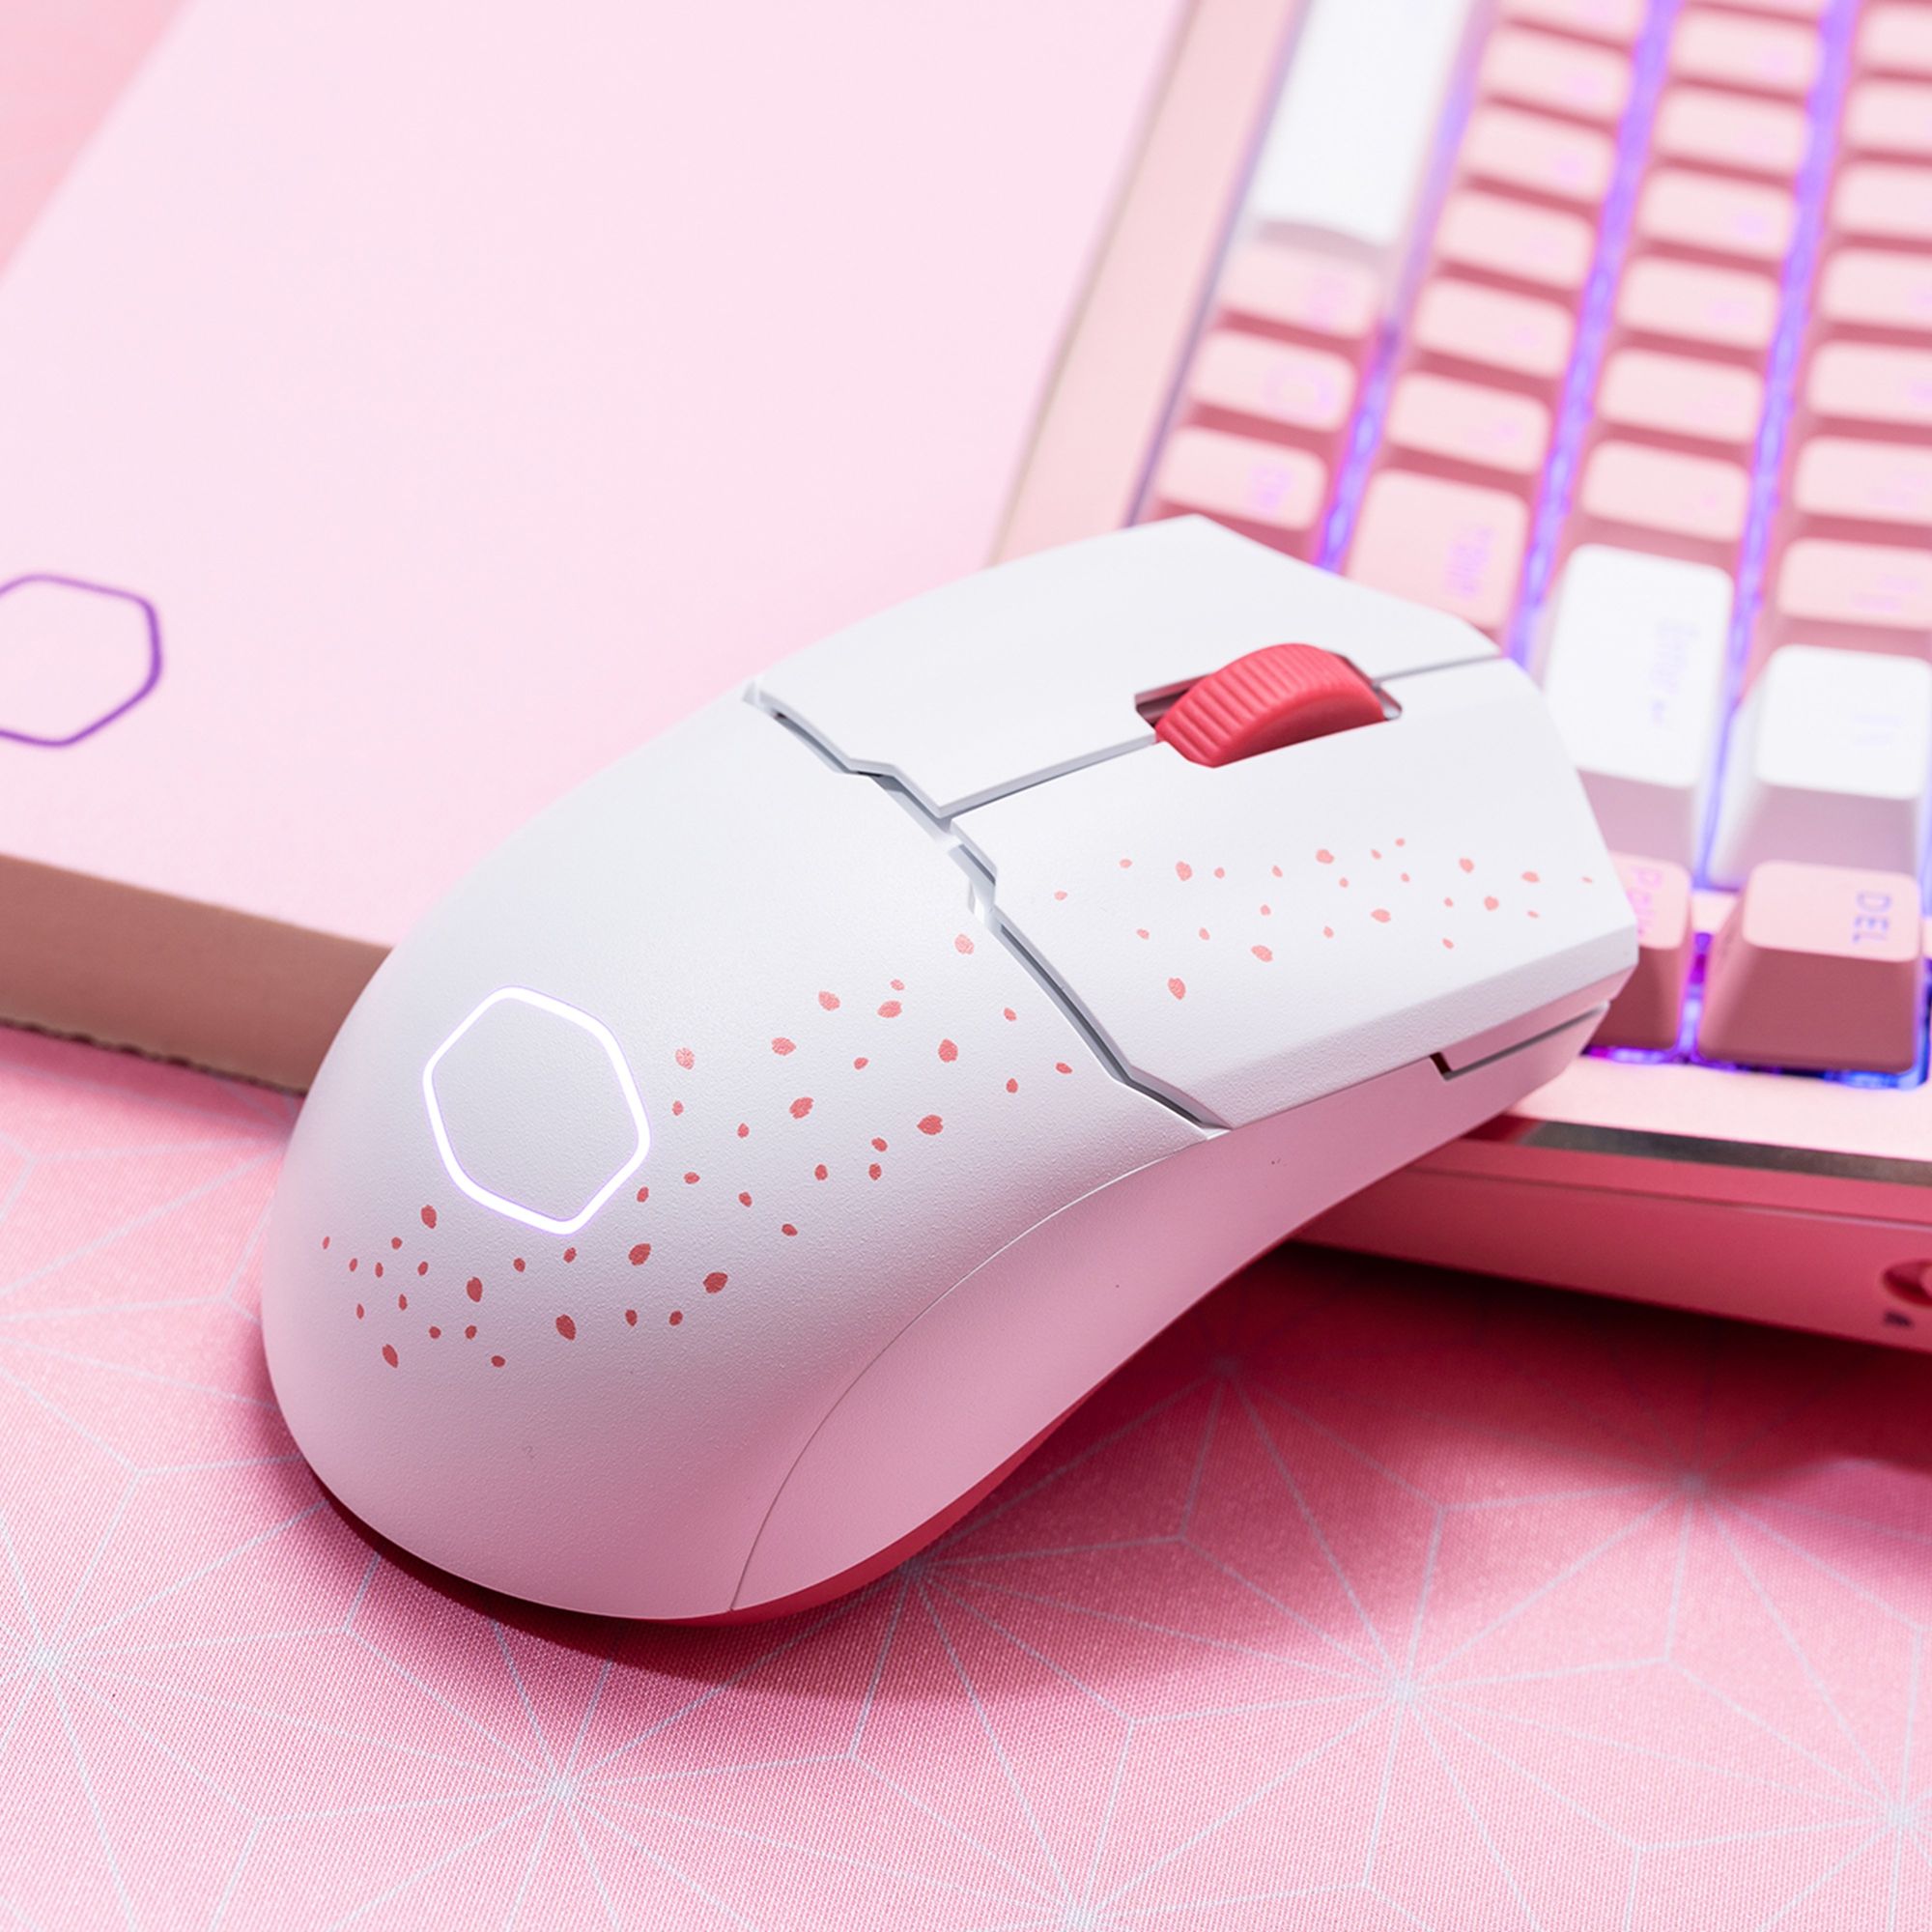 cooler master’s limited edition sakura collection re-run features a pink keyboard and a minimalist mouse